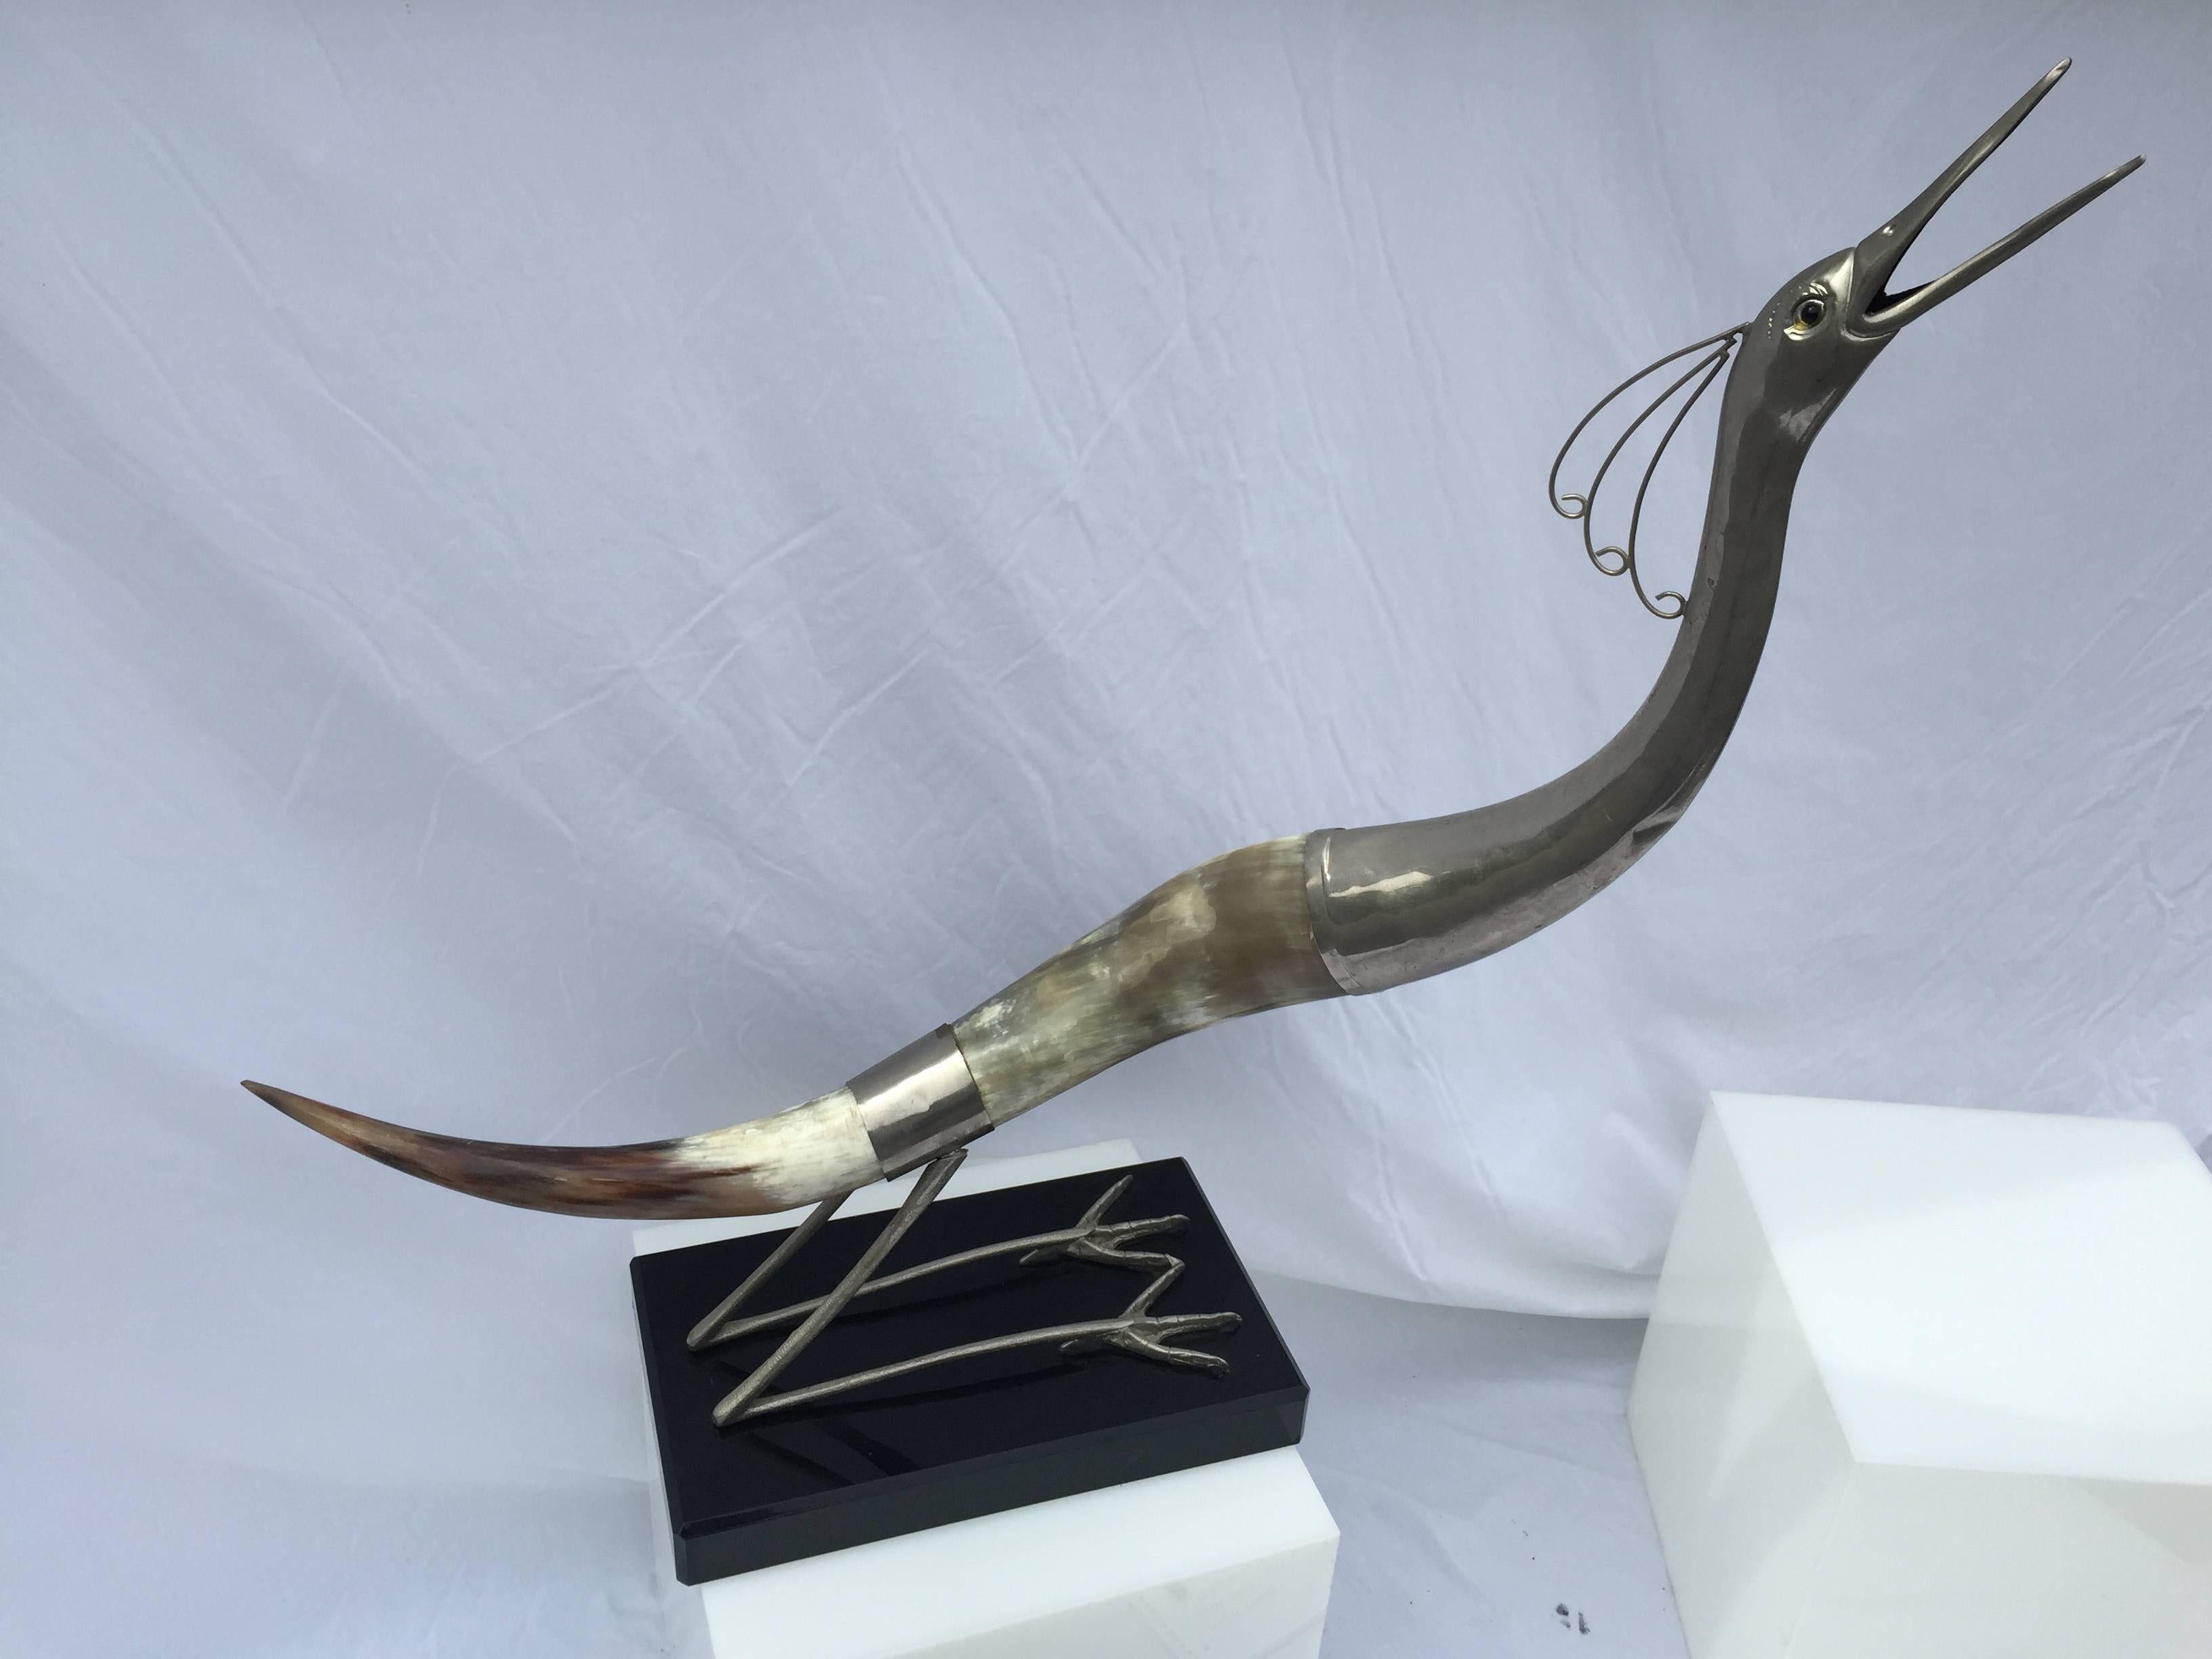 A pair of sculptural horn and silvered brass stylized birds. The approximate measurements are: 1). 38 inches high by 26 inches wide by 3.5 inches deep and 2). 37 inches high by 34 inches wide by 3.5 inches deep. Each base measures 9.75 inches deep